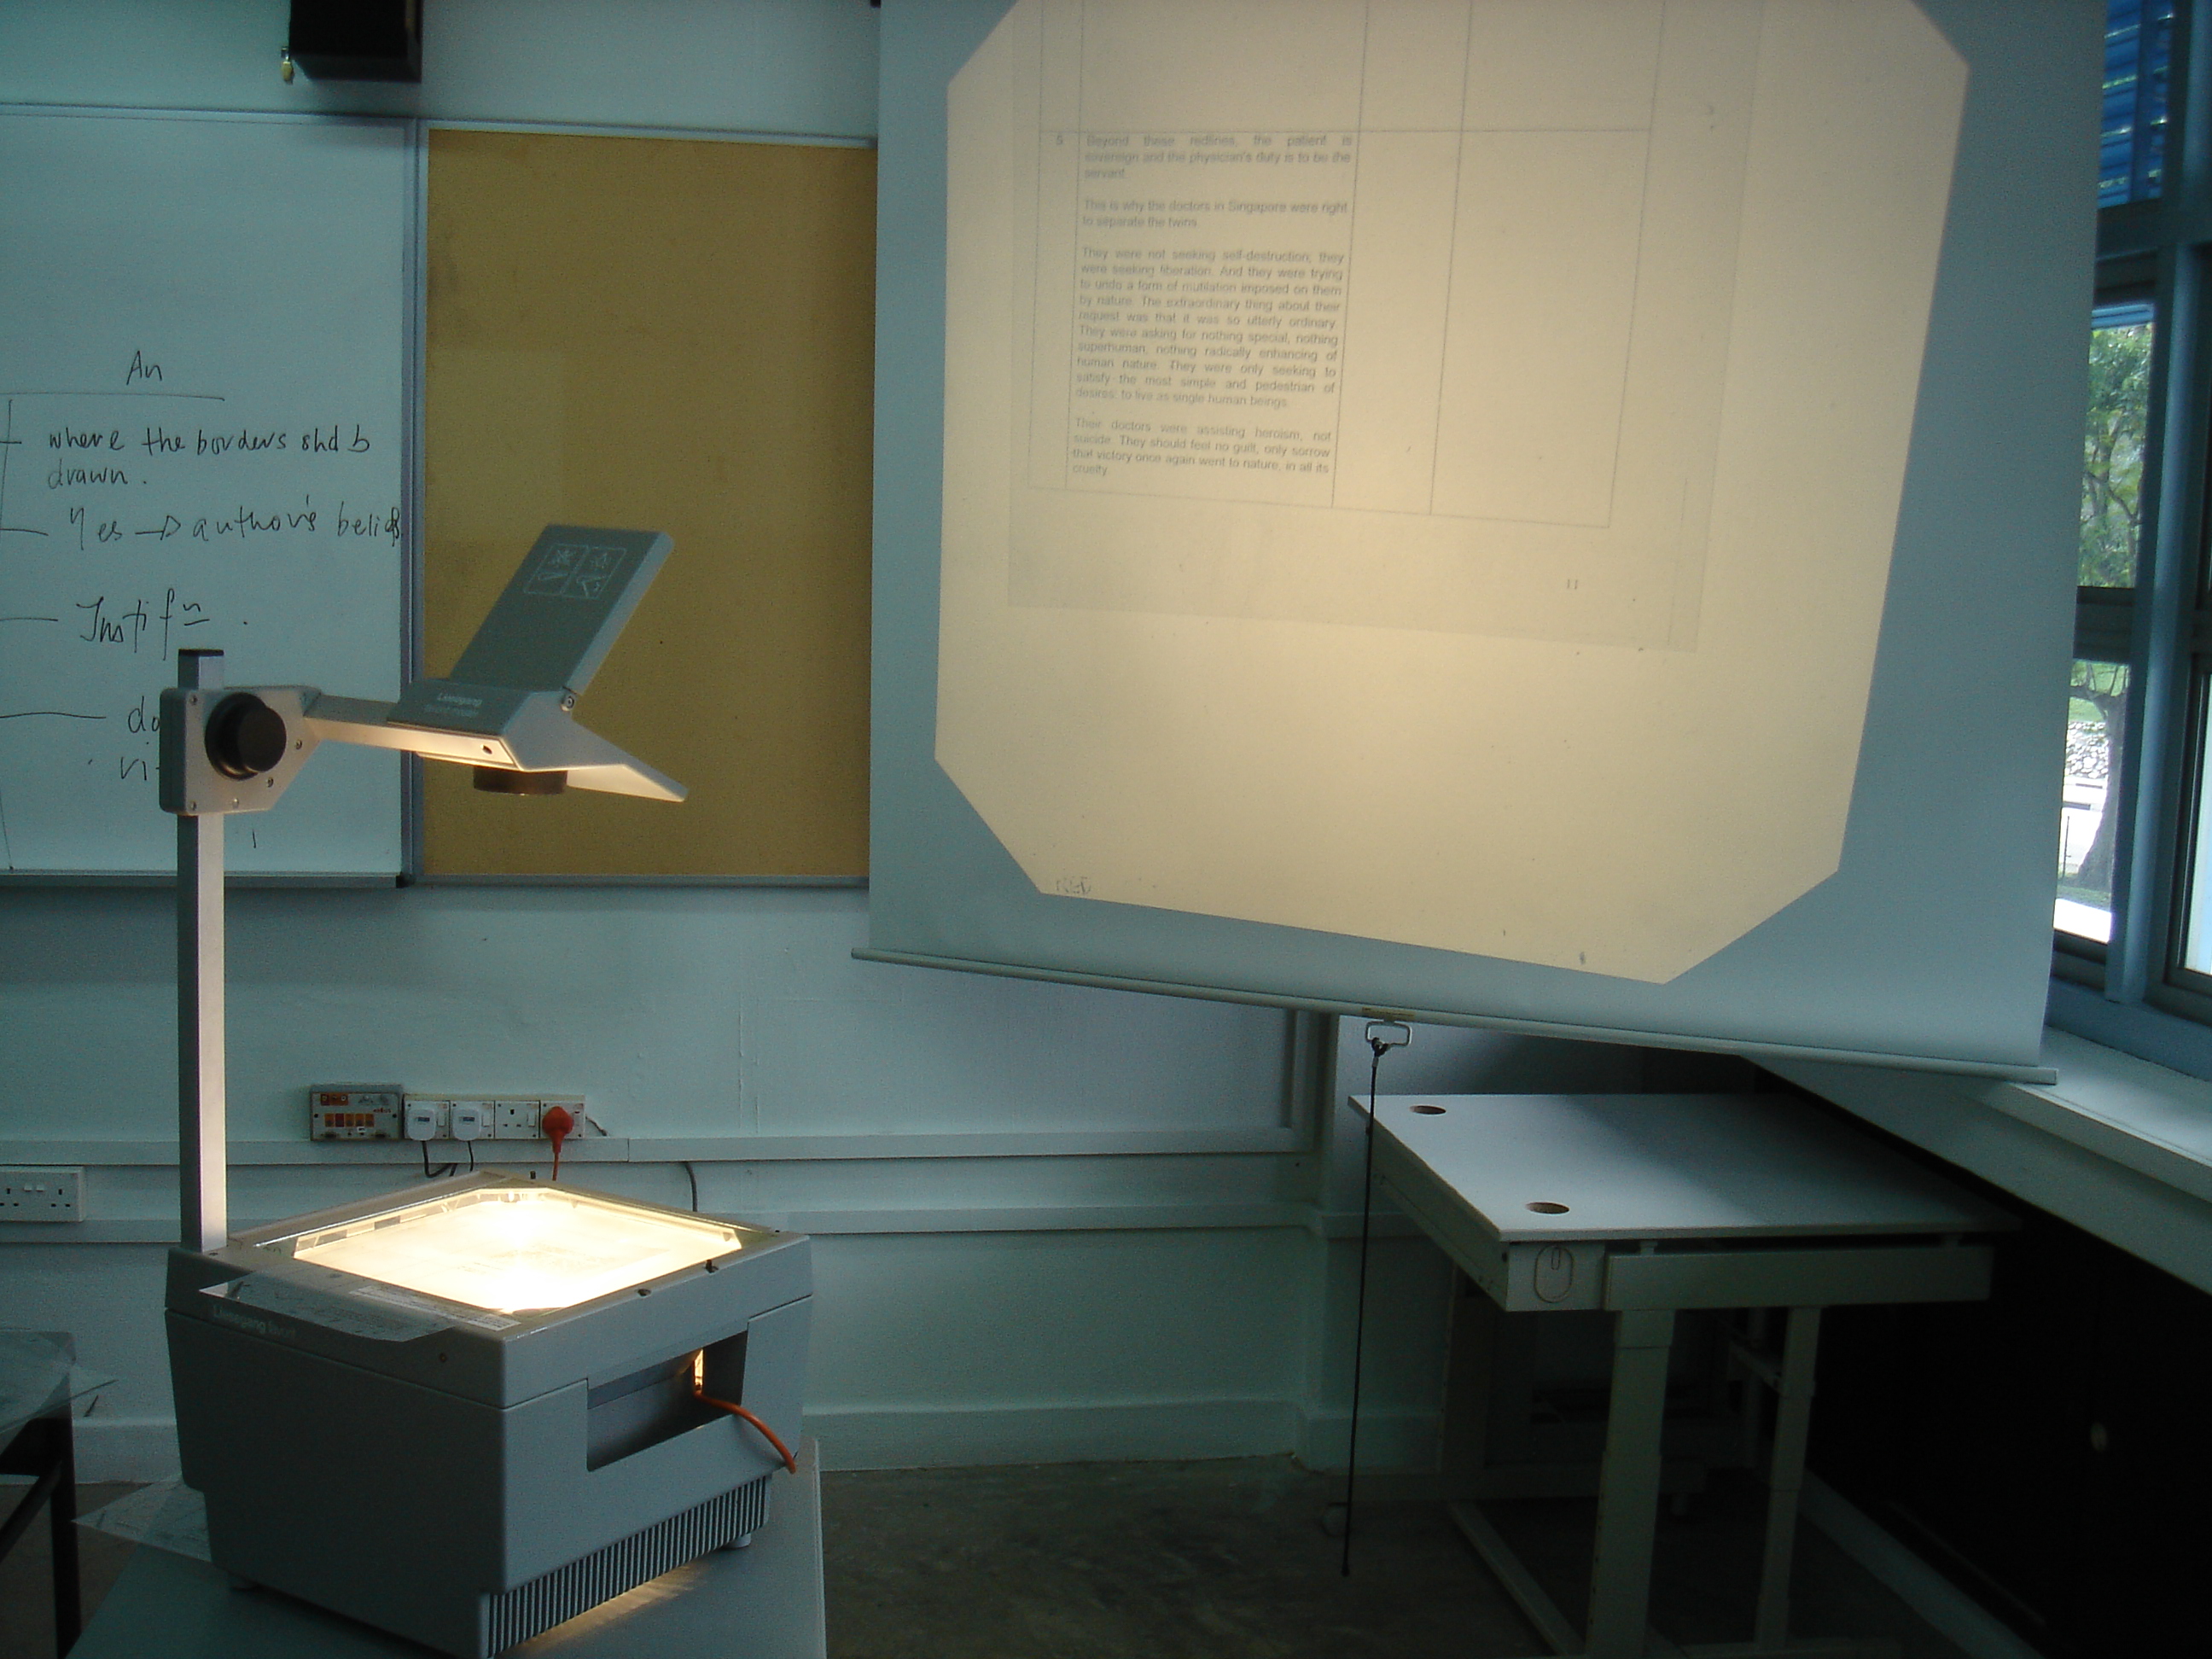 An overhead projector and screen